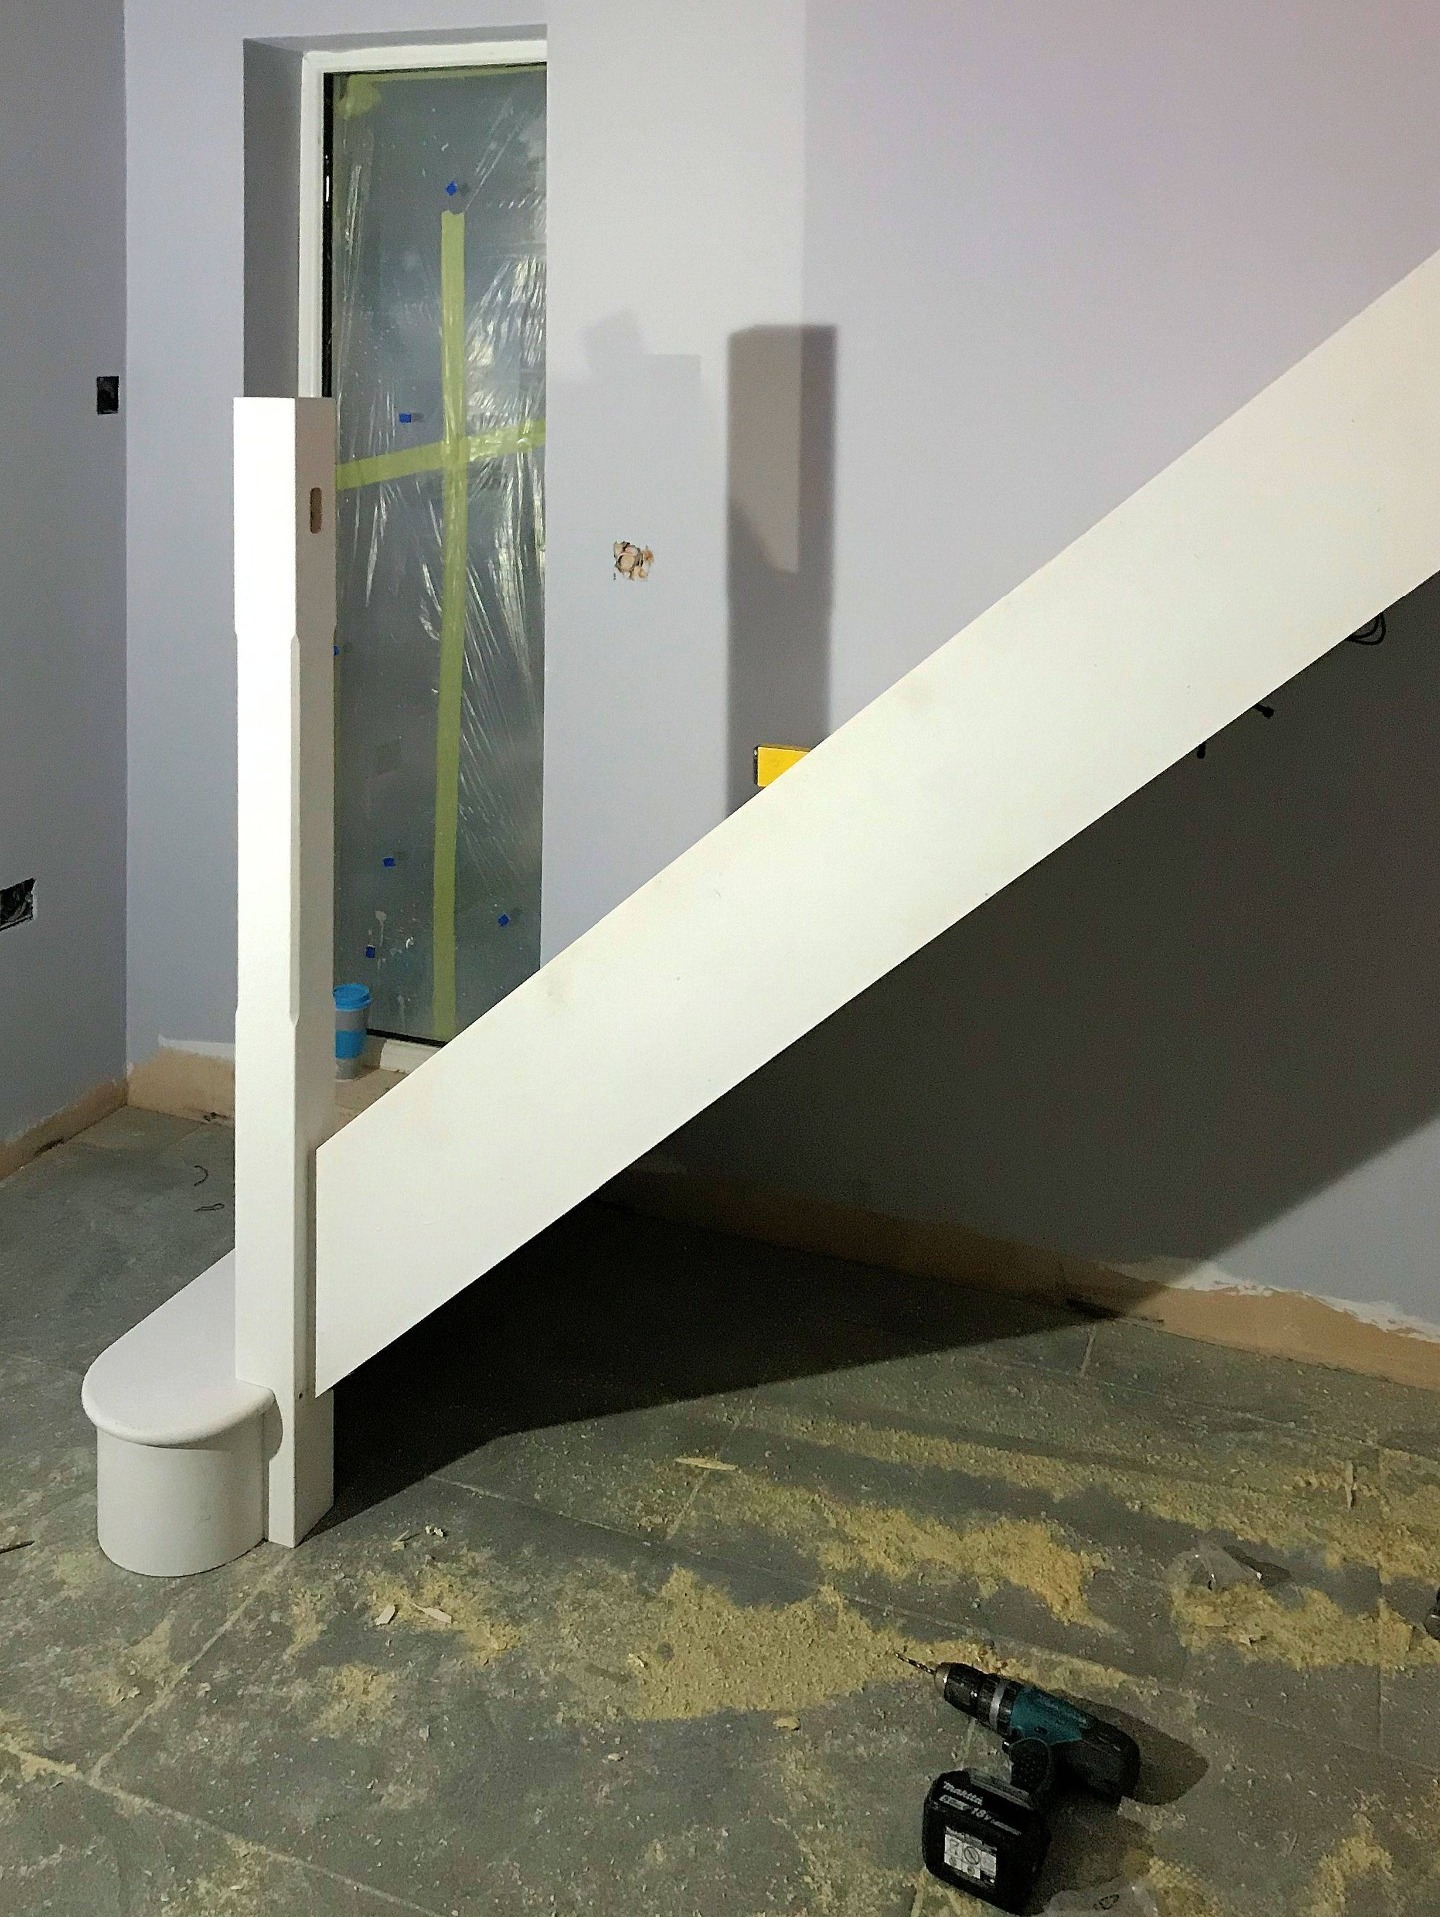 Staircase Construction, Feature Step with ground floor Newel for handrail, Barnstaple North Devon